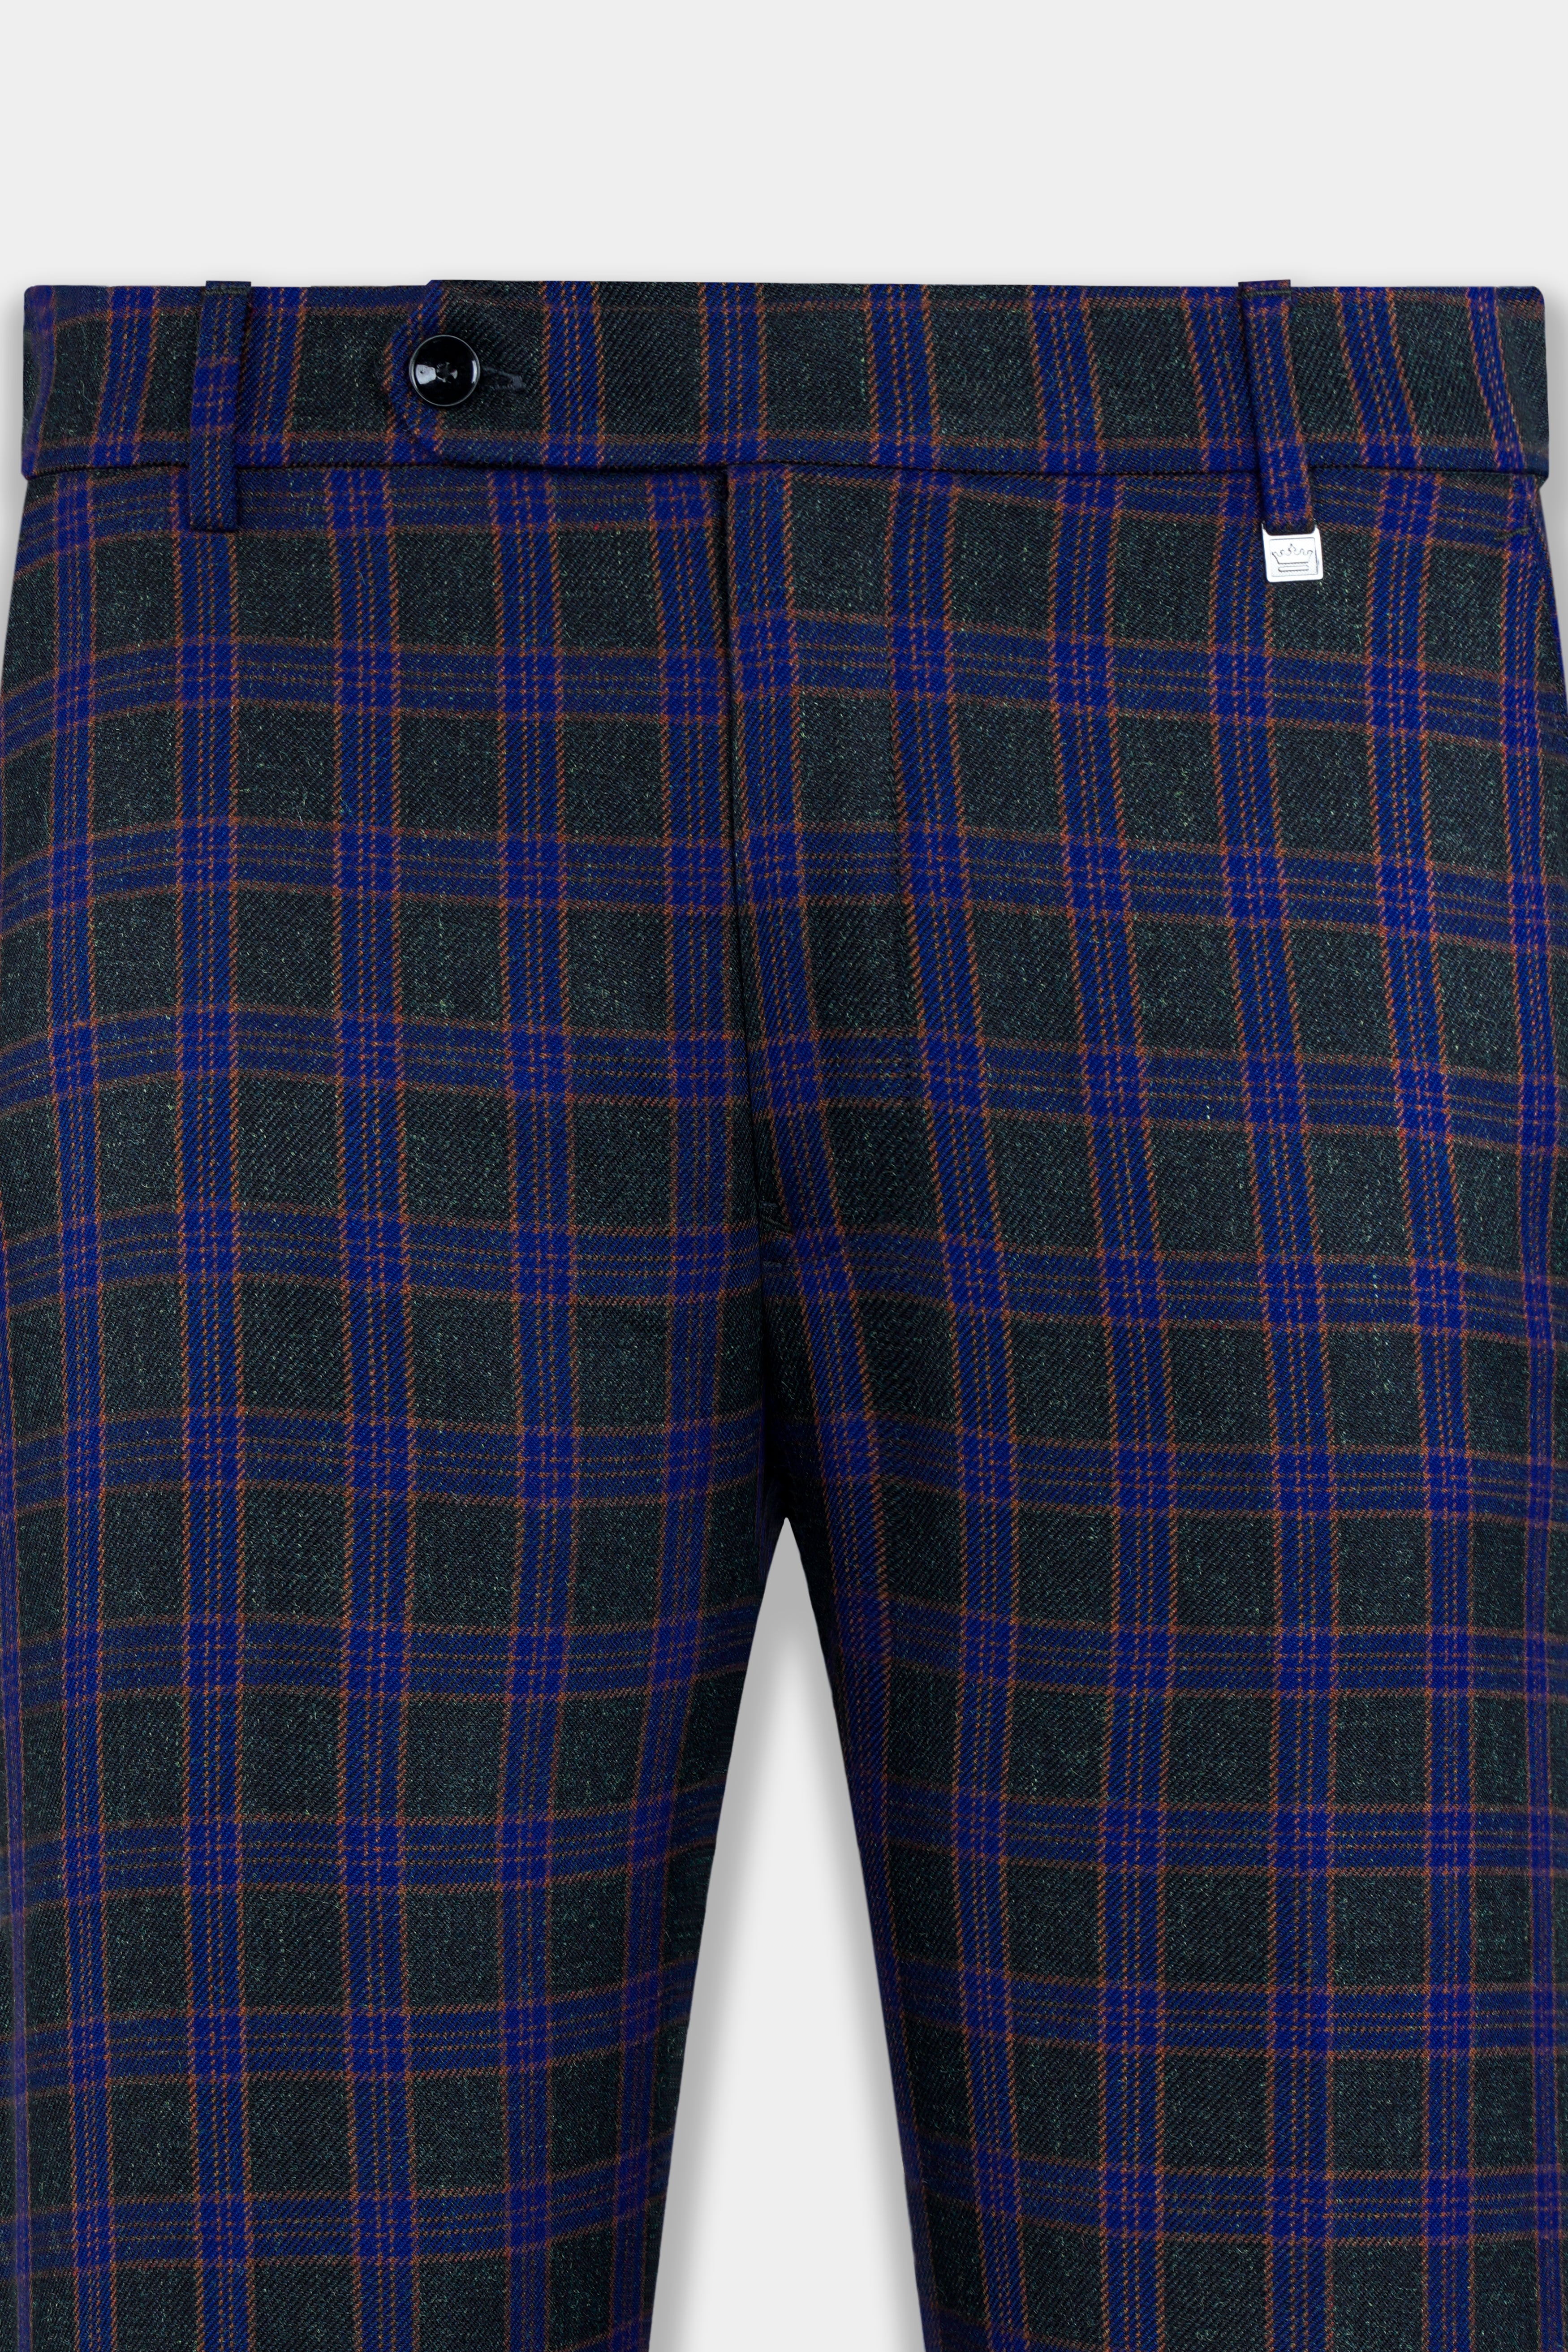 Buy U.S. Polo Assn. Comfort Fit Check I659 Lounge Pants - Pack Of 1 (BLUE  BIG CHECK S) at Amazon.in